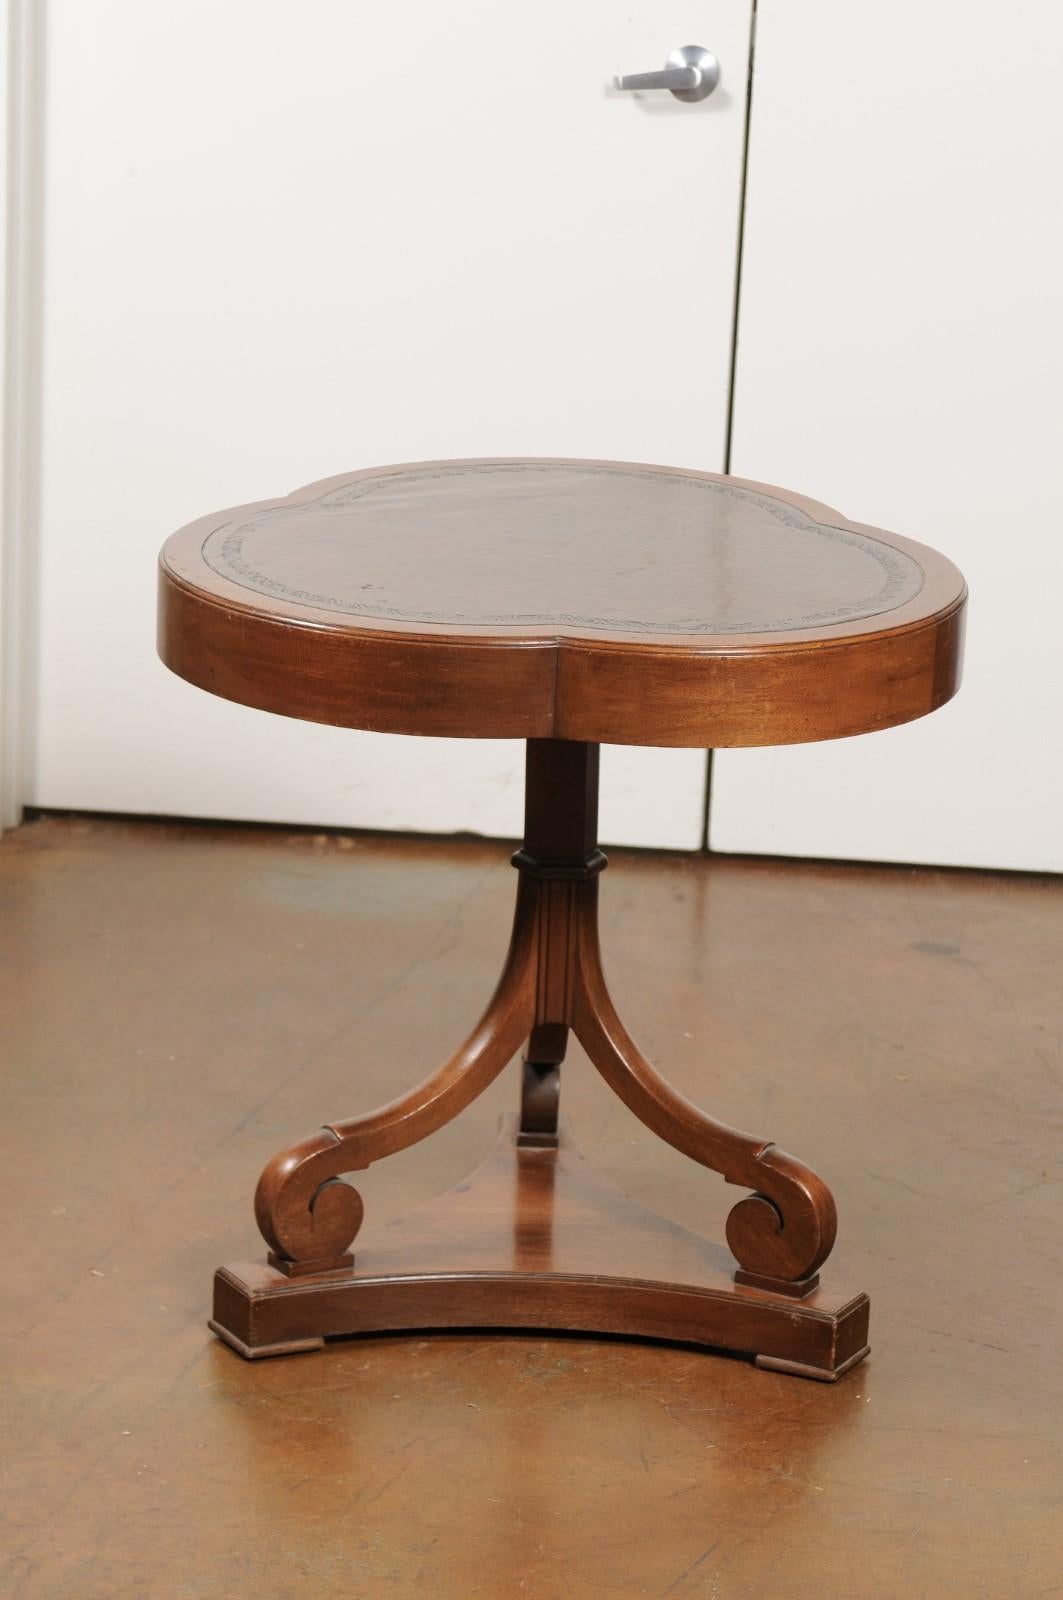 A French walnut clover leaf accent table from the 19th century with tooled leather top and scrolling base. This pretty French table features an exquisite clover leaf shaped top, fitted with brown tooled leather. This unusual top is raised on a